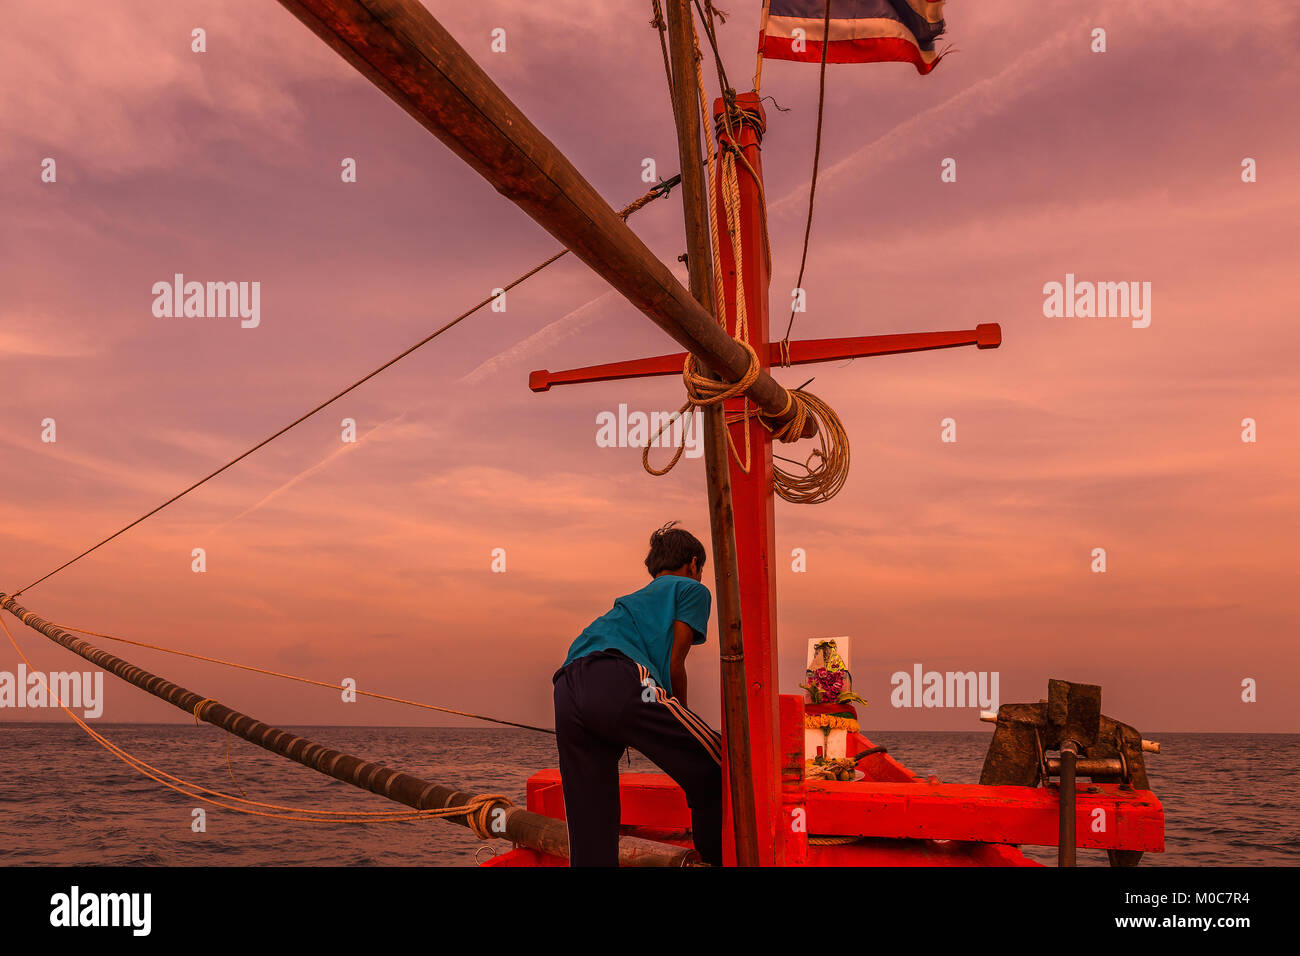 fisherman working with fishing rod on the fisherman boat on the sea Stock Photo